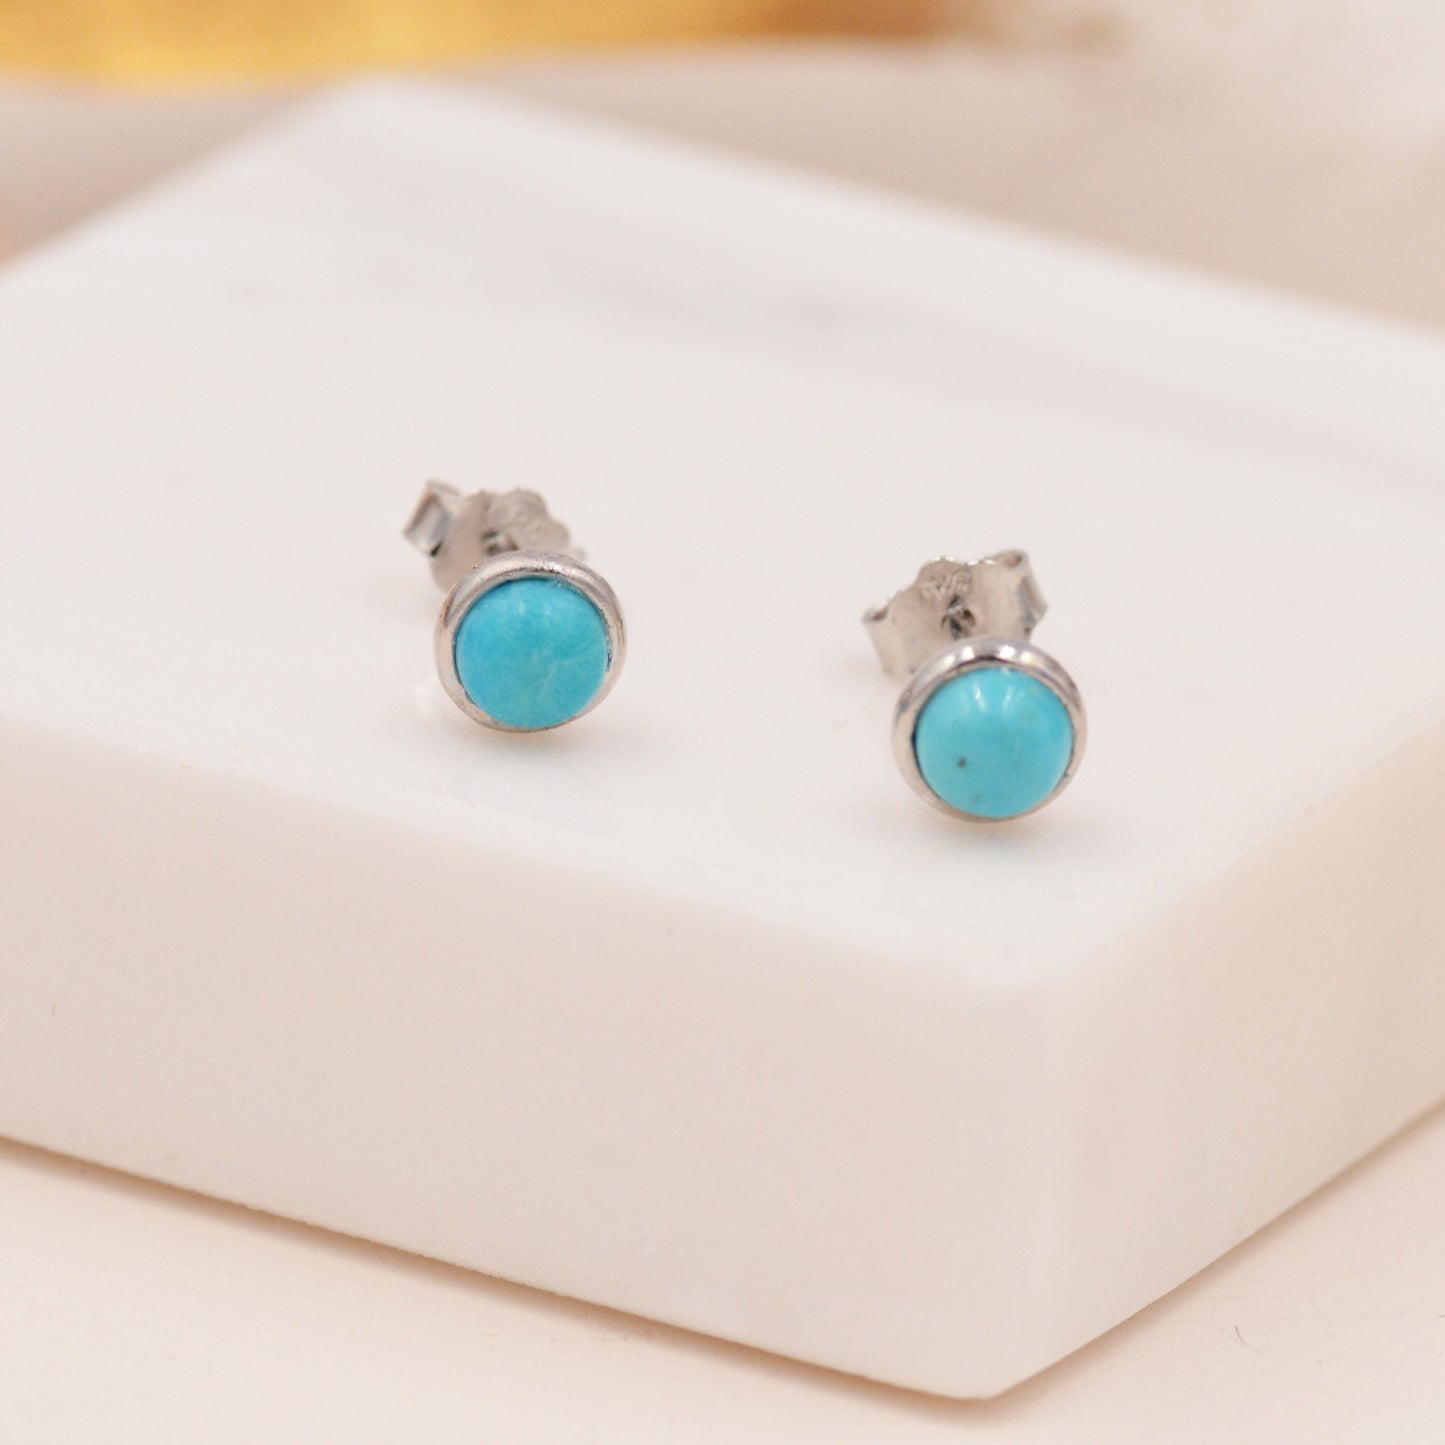 Sterling Silver Small Turquoise Stone Stud Earrings,  4mm Genuine Turquoise Stone, Semi-precious Jewellery